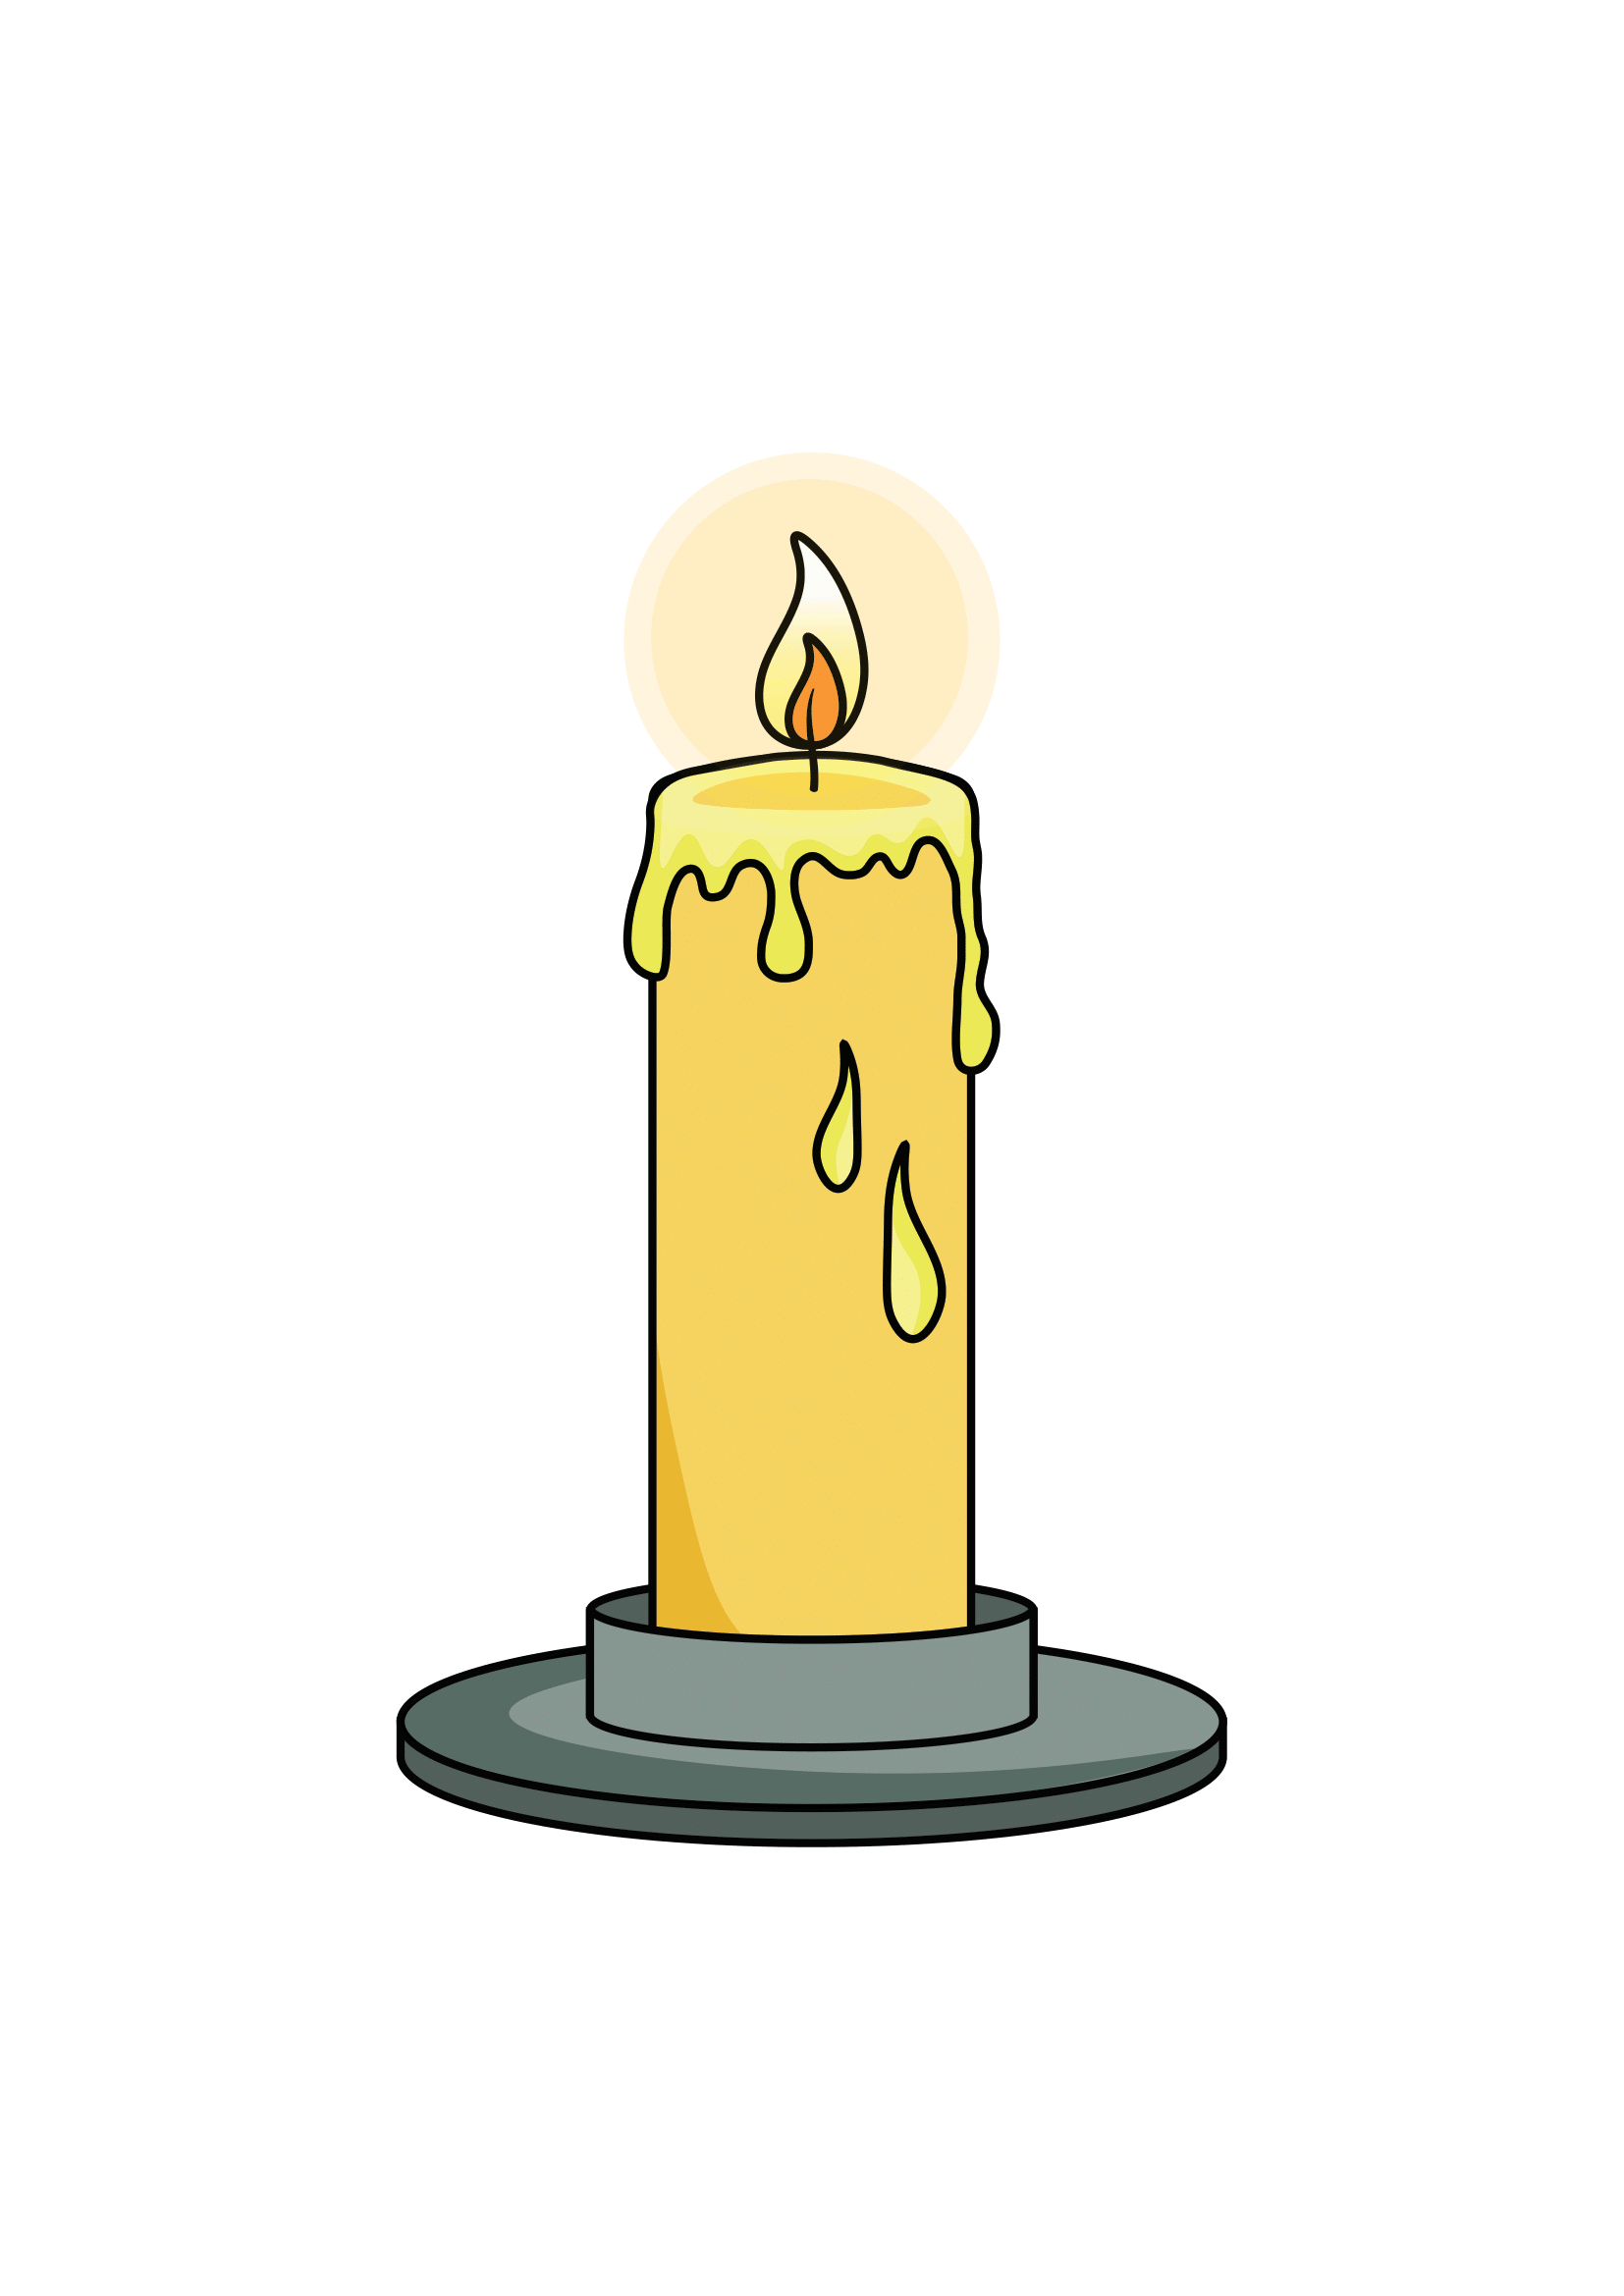 How to Draw A Candle Step by Step Printable